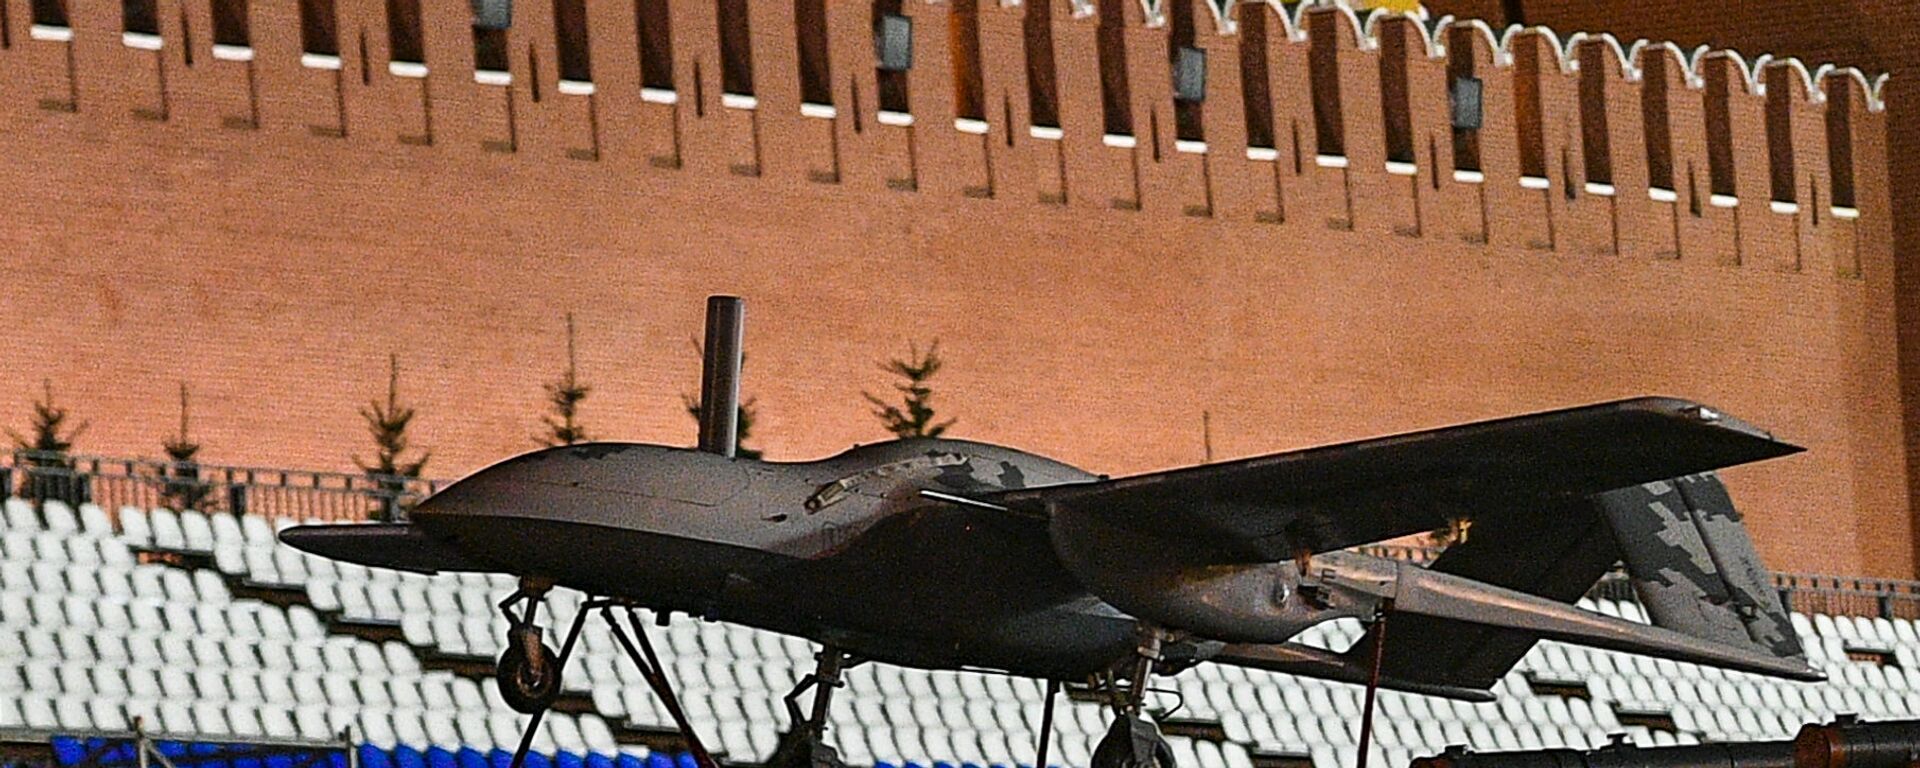 Russia's Korsar Drone Flight Model during Russian army rehearsals for 9 May 2019 Victory Day military parade - Sputnik International, 1920, 29.04.2023